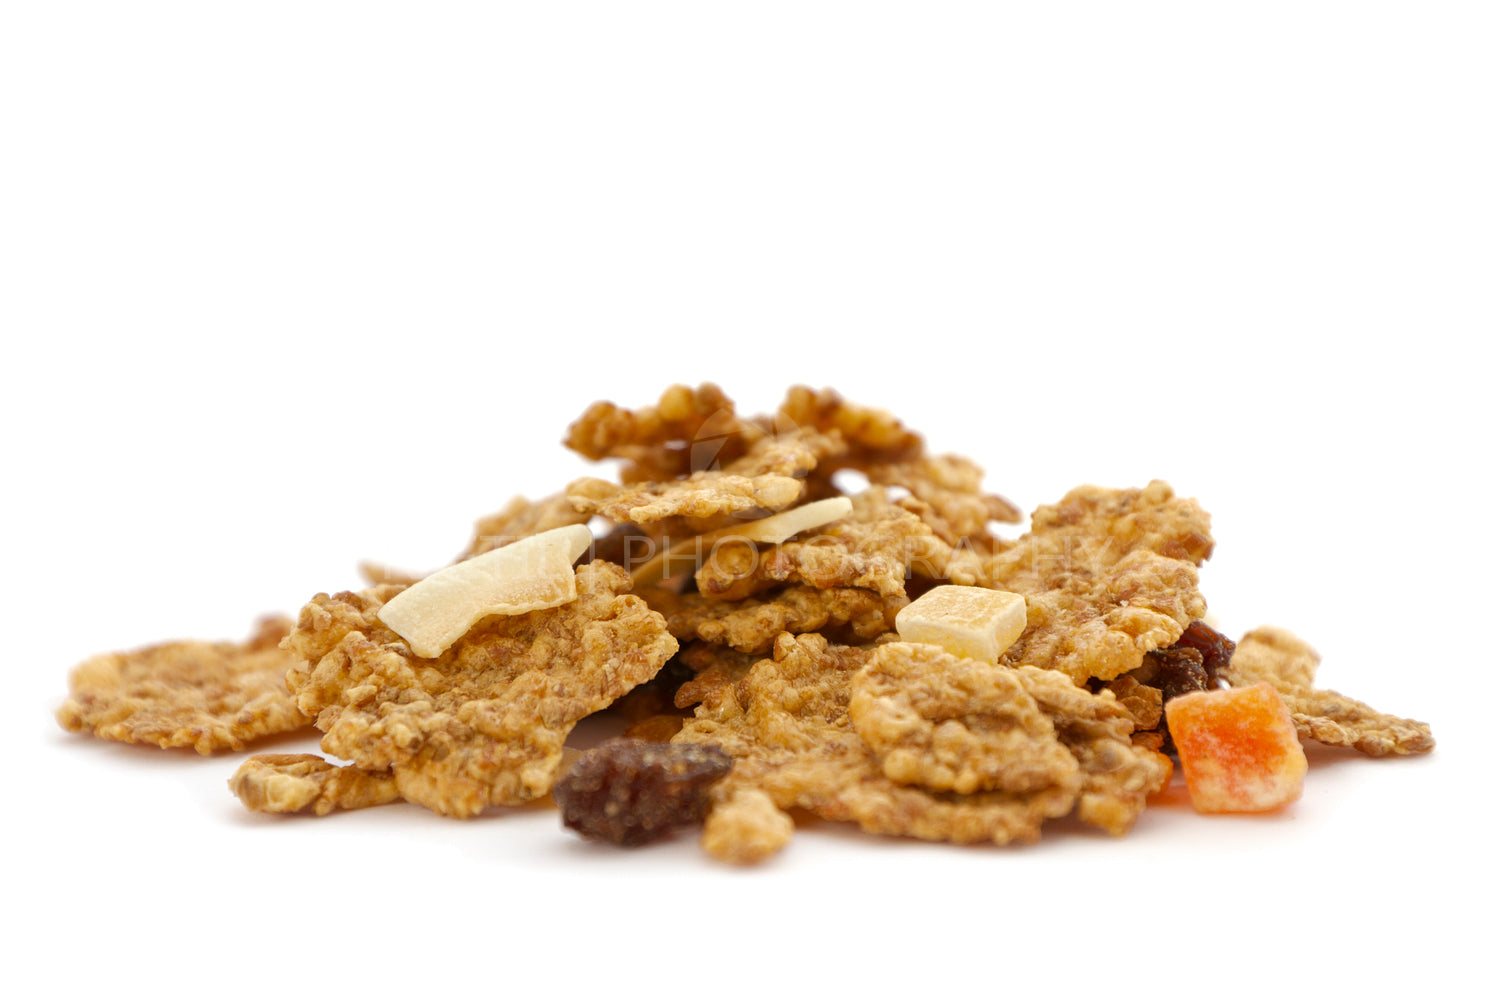 Cereal with Raisin and Dried Fruit